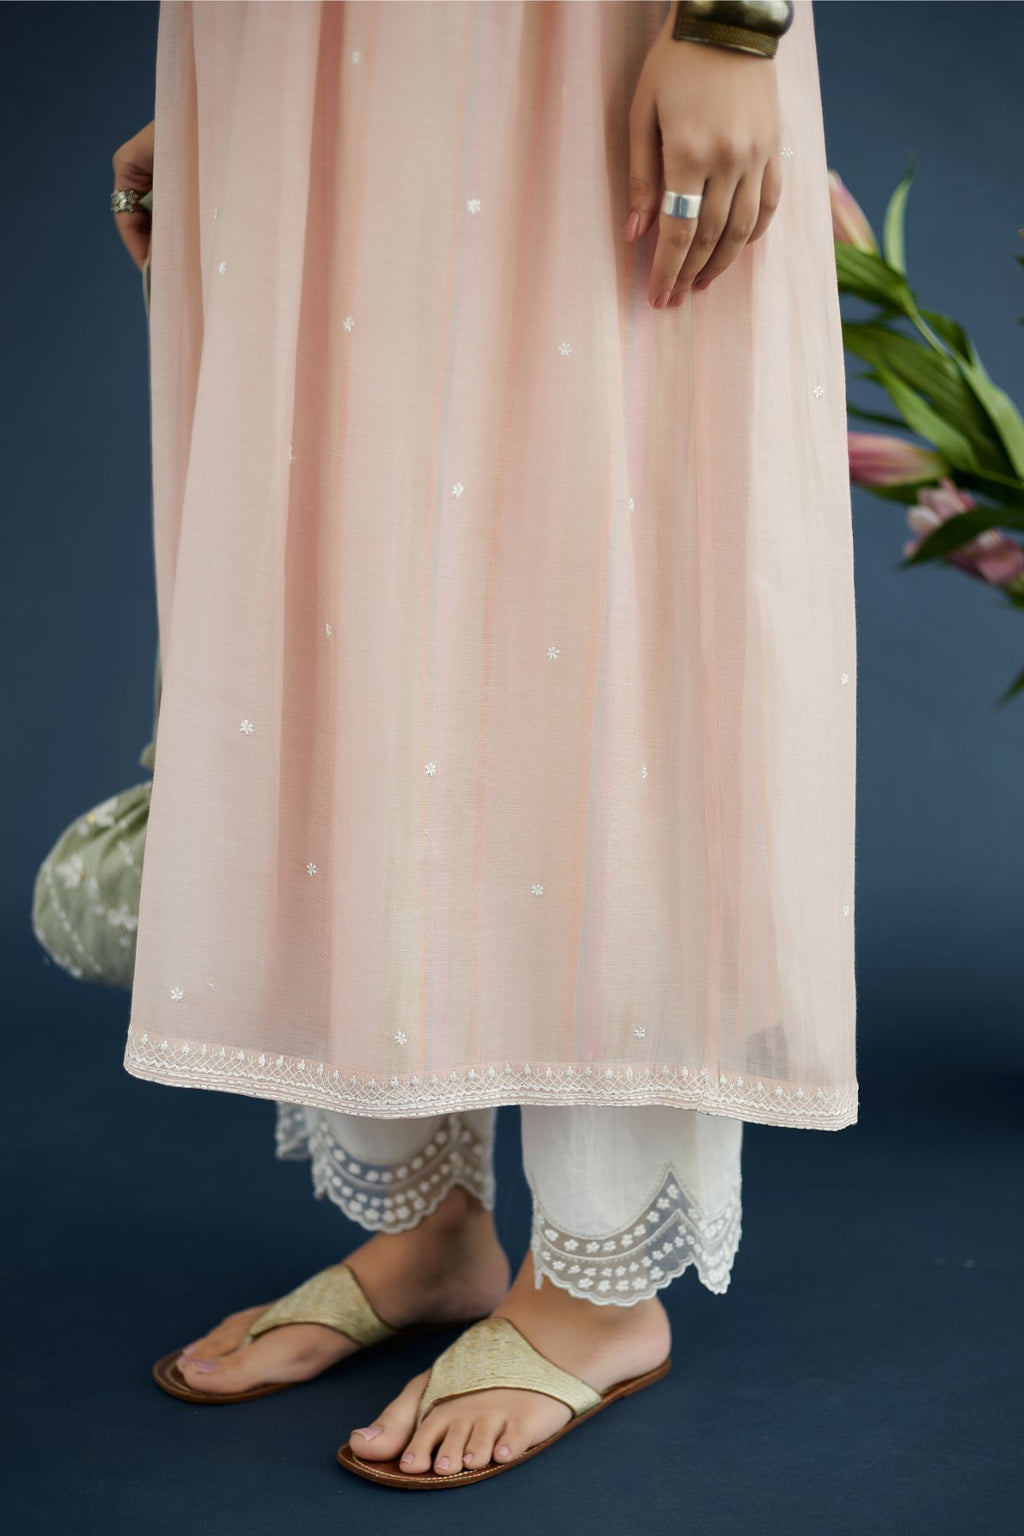 Pink embroidered kurta set with gathered empire waist line in front and back and hand block printed cotton slip inside